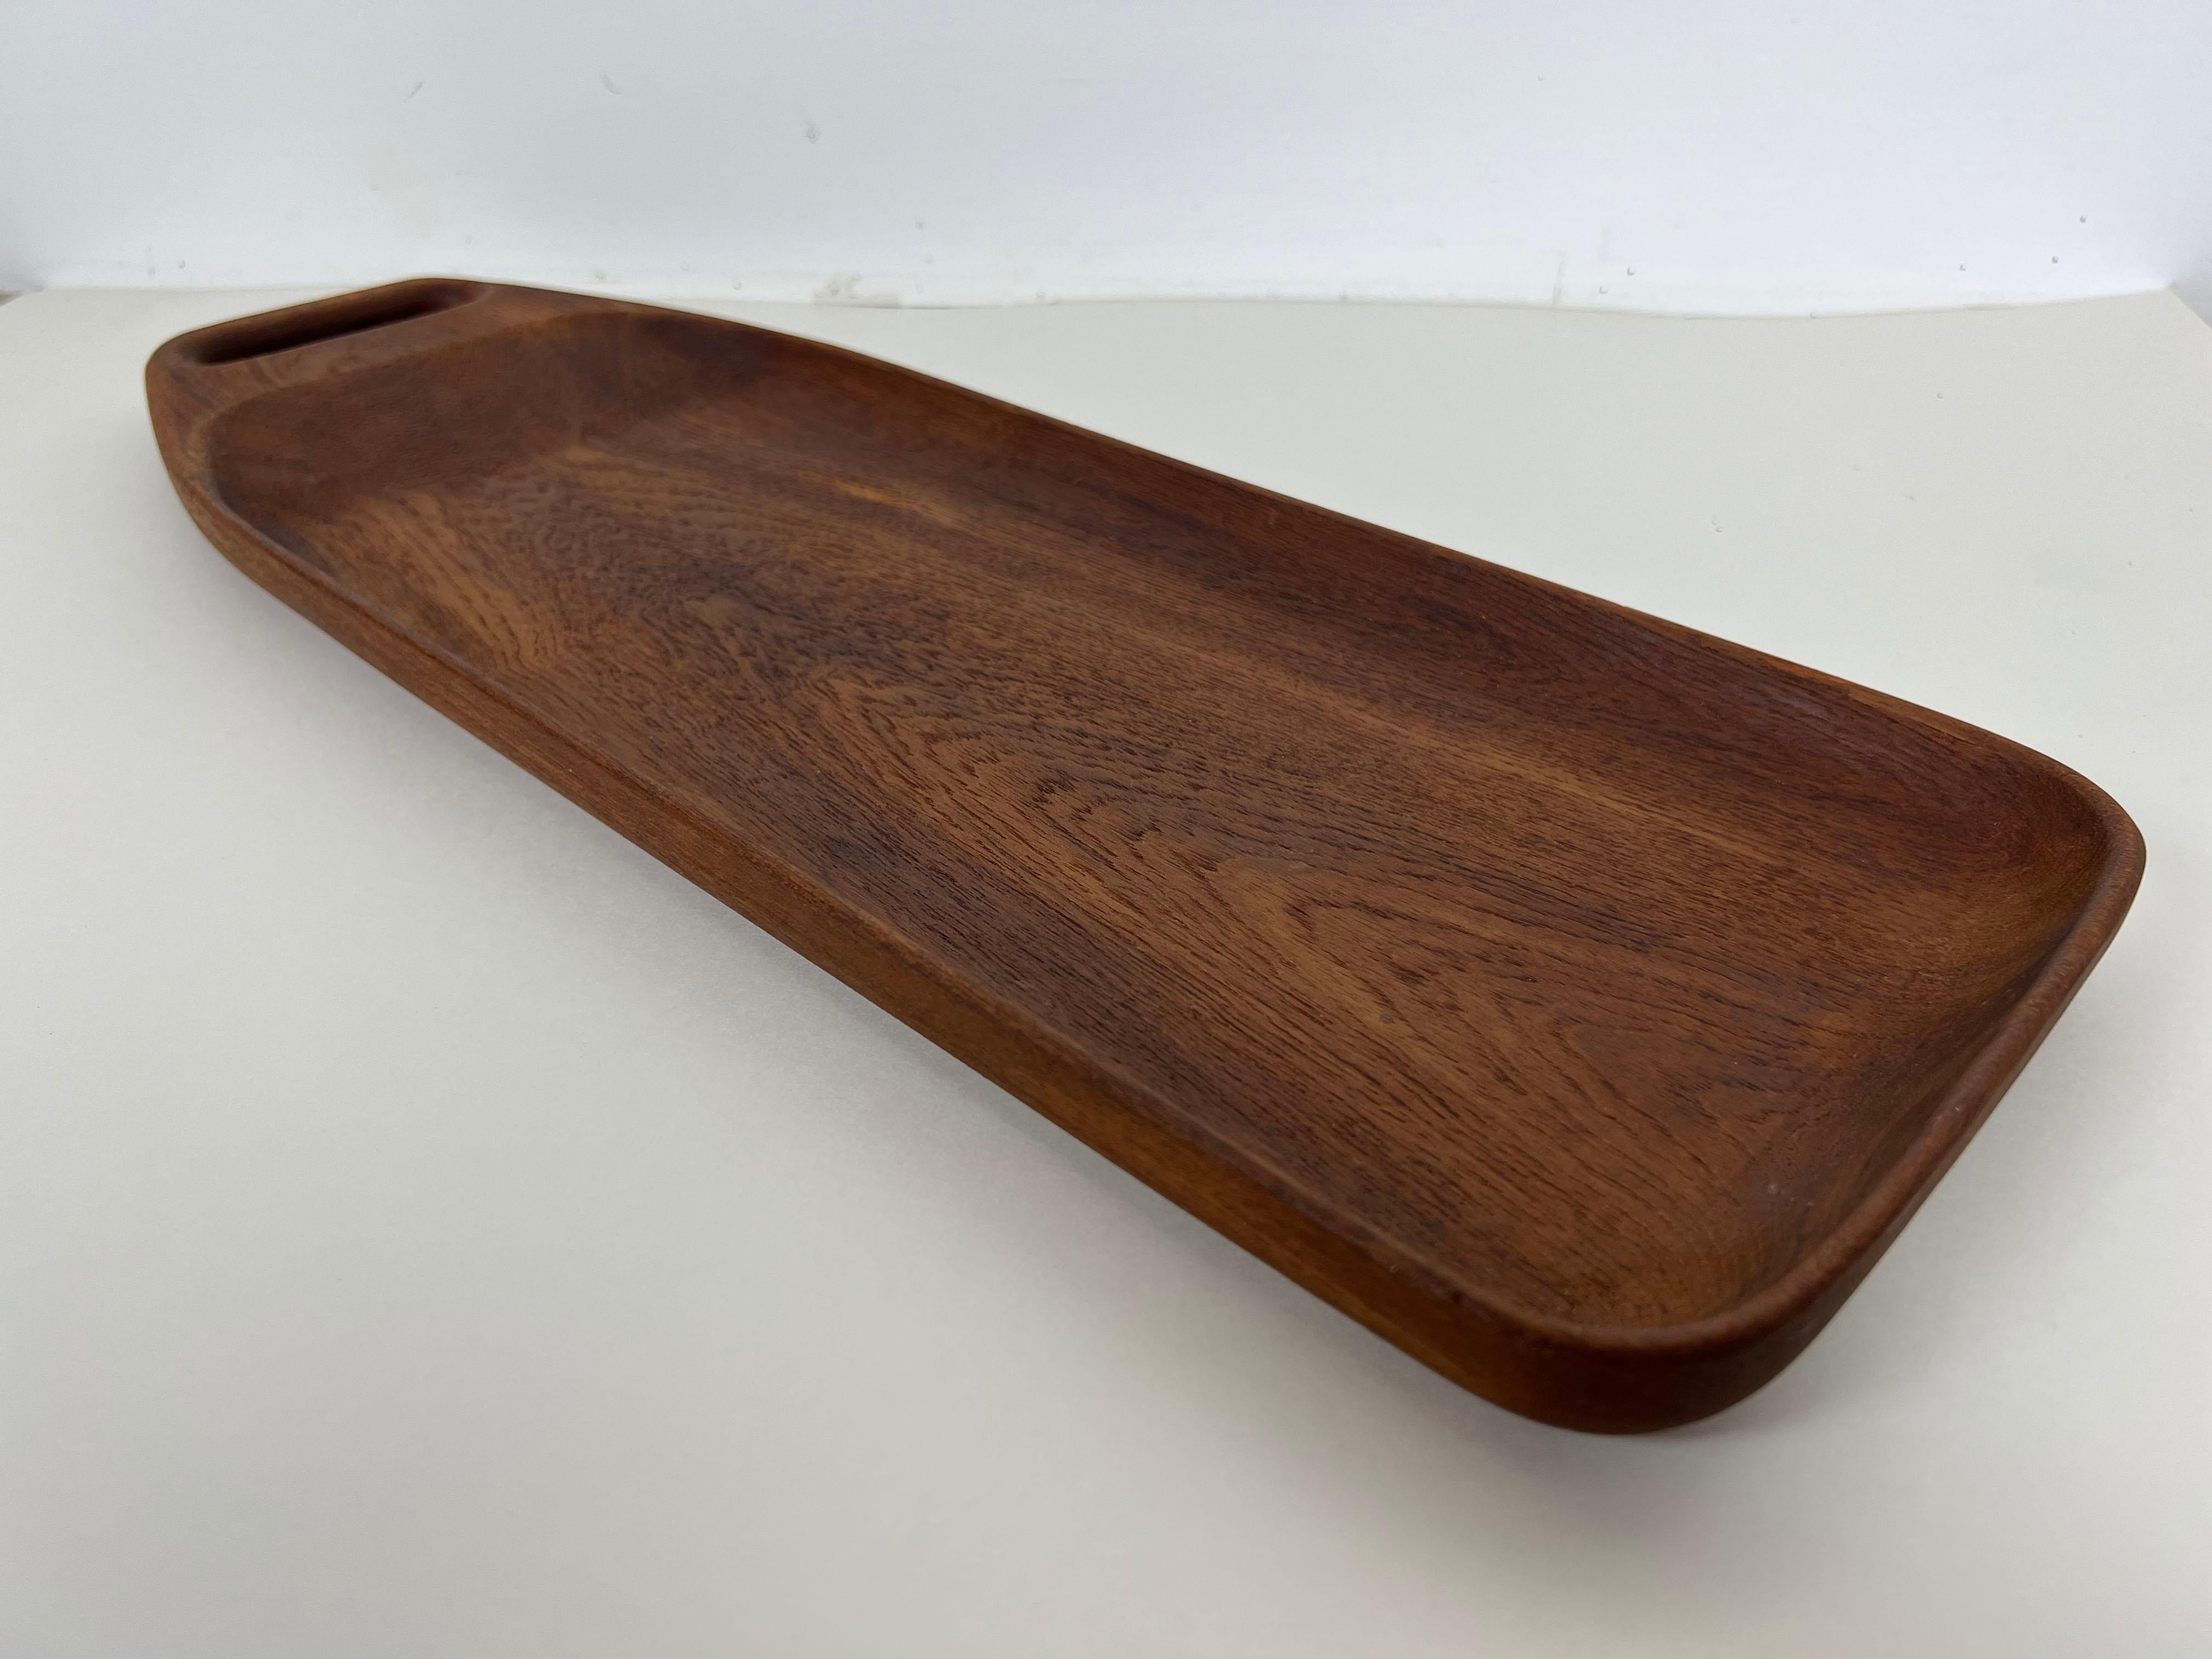 Are vintage Danish serving tray with a beautifully sculpted form and single handle made from solid teak for Bonniers NYC.

Year: 1960s

Origin: Denmark

Dimensions: 19.5